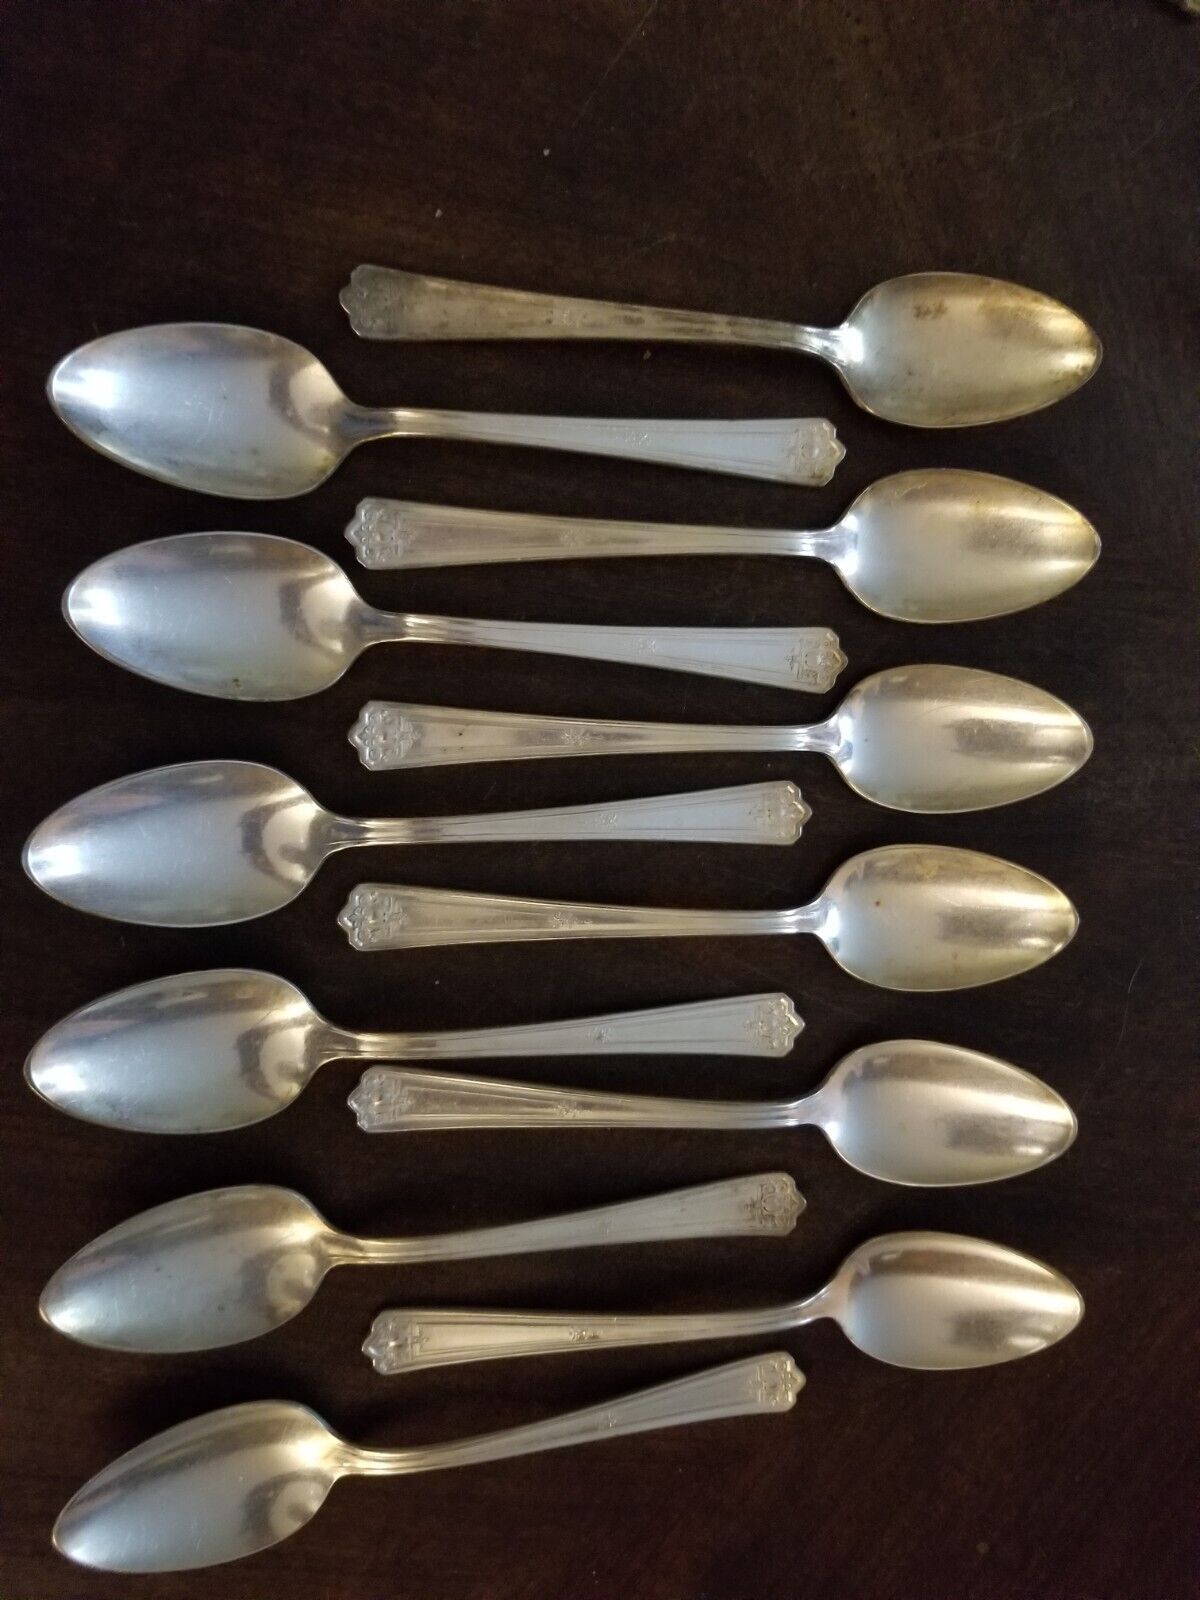 Roger Bros IS A1 XII 1928 MAJESTIC Teaspoon Silver Plate Lot of 12